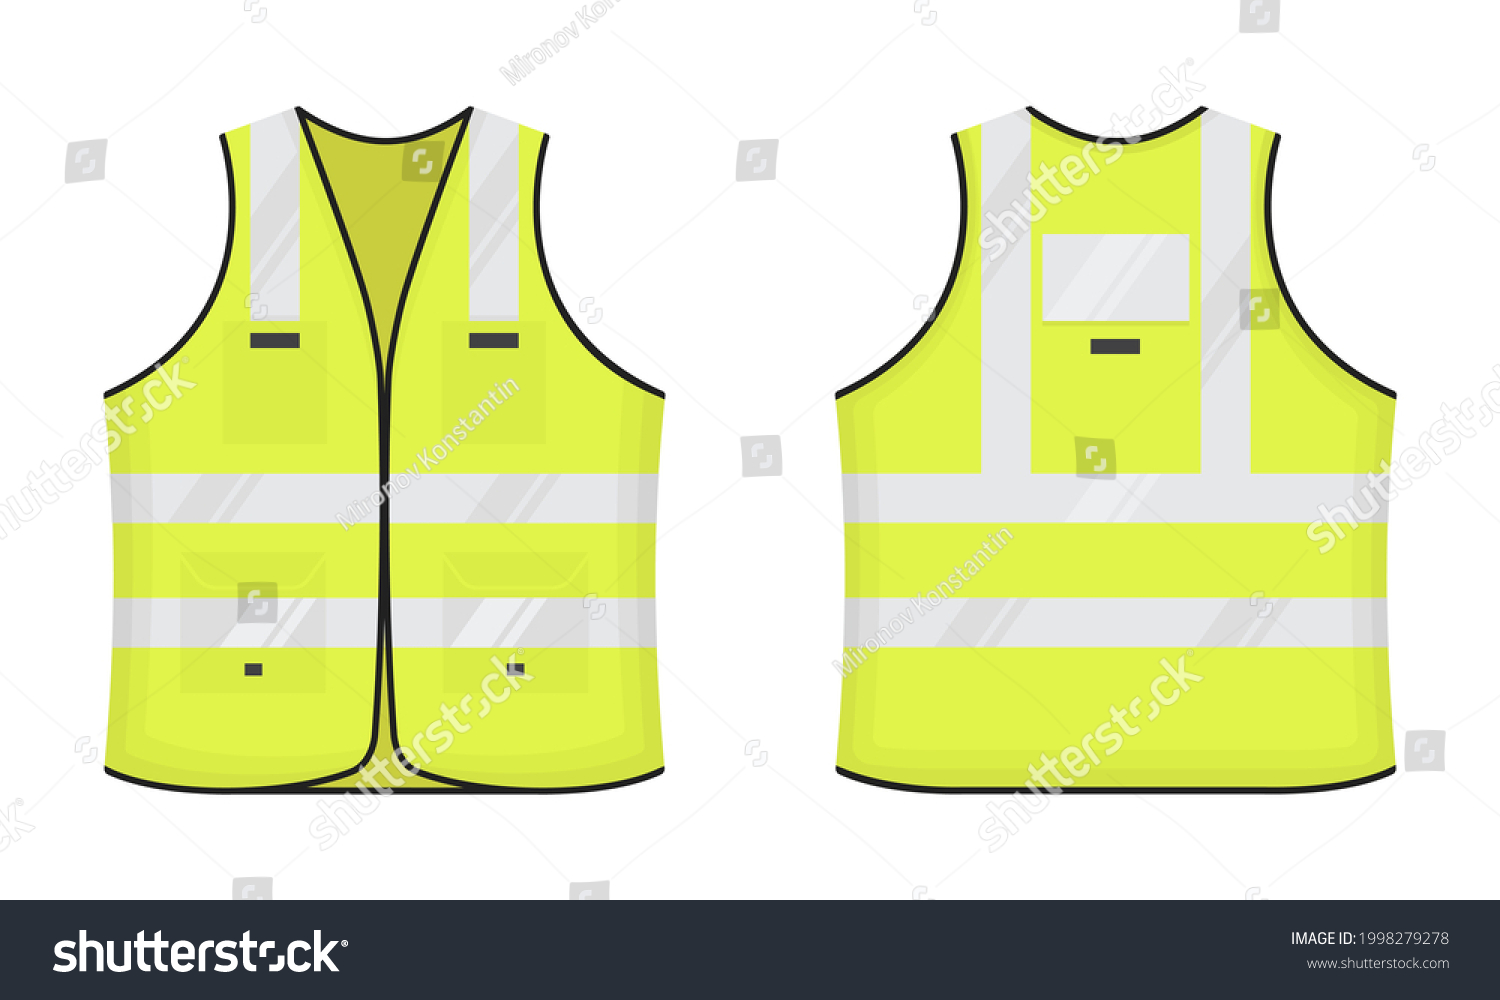 SVG of Safety reflective vest icon sign flat style design vector illustration set. Yellow fluorescent security safety work jacket with reflective stripes. Front and back view road uniform vest. svg